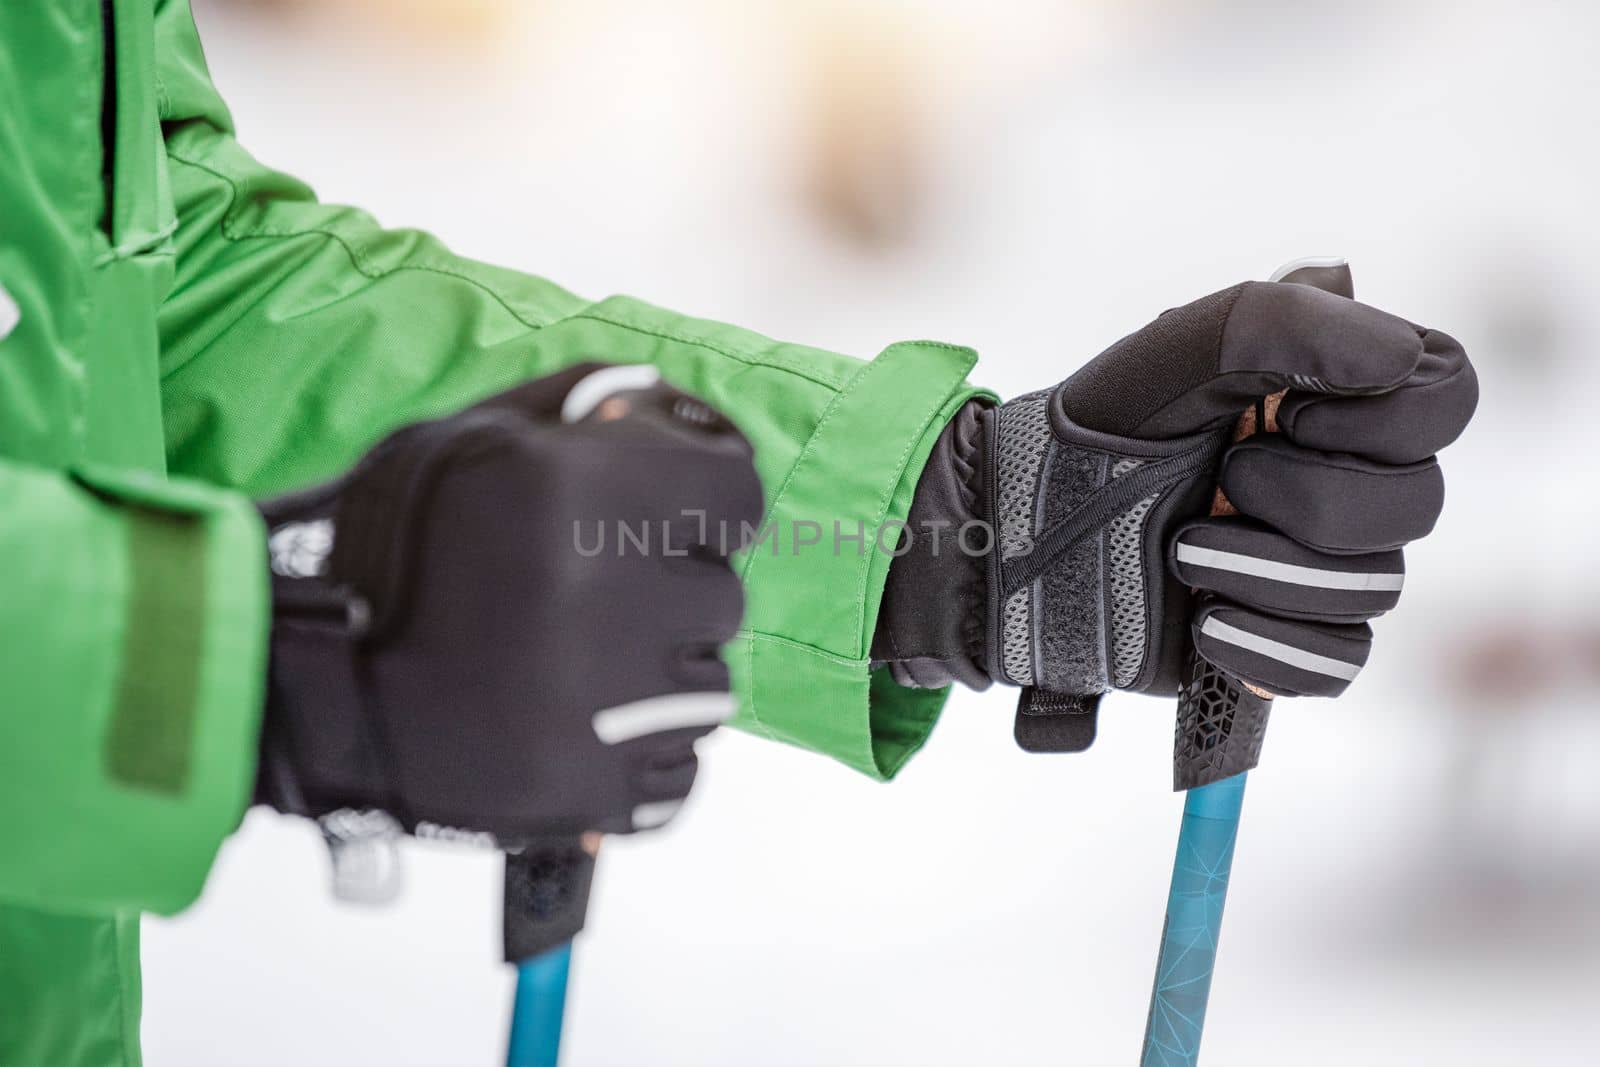 Nordic walking in winter. Sports activities in the winter on the snow. A man is engaged in Nordic walking with special sticks in the winter nature outdoors. Place for copy space